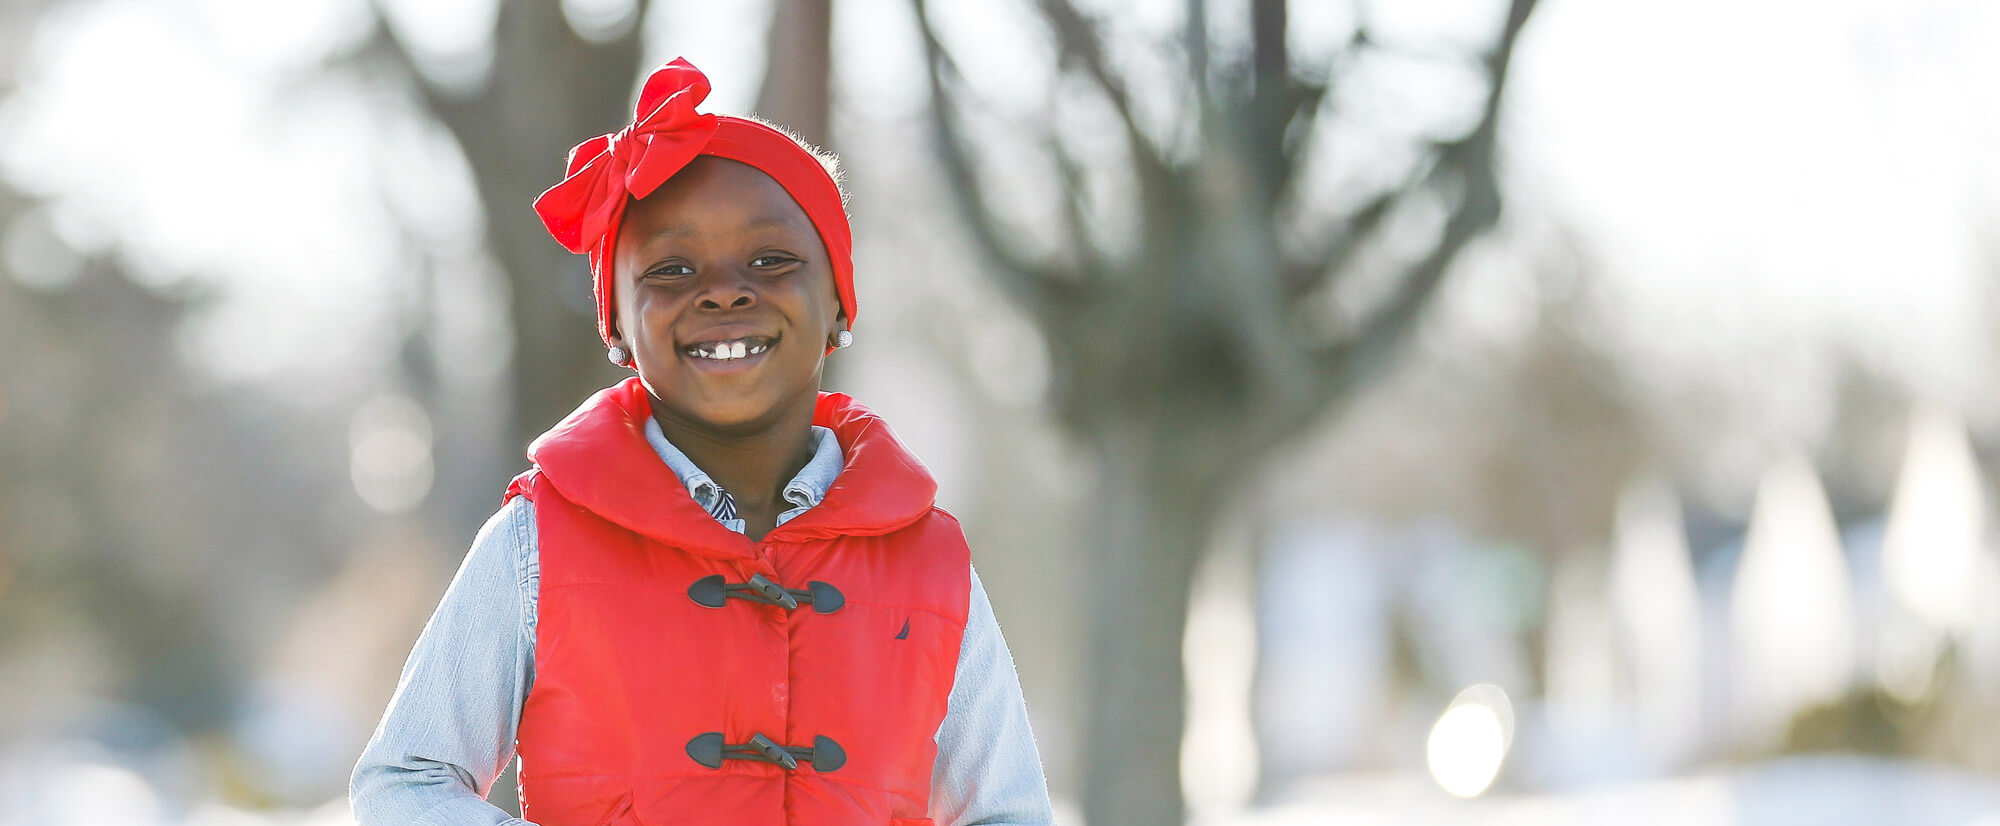 Little girl in a red vest smiling